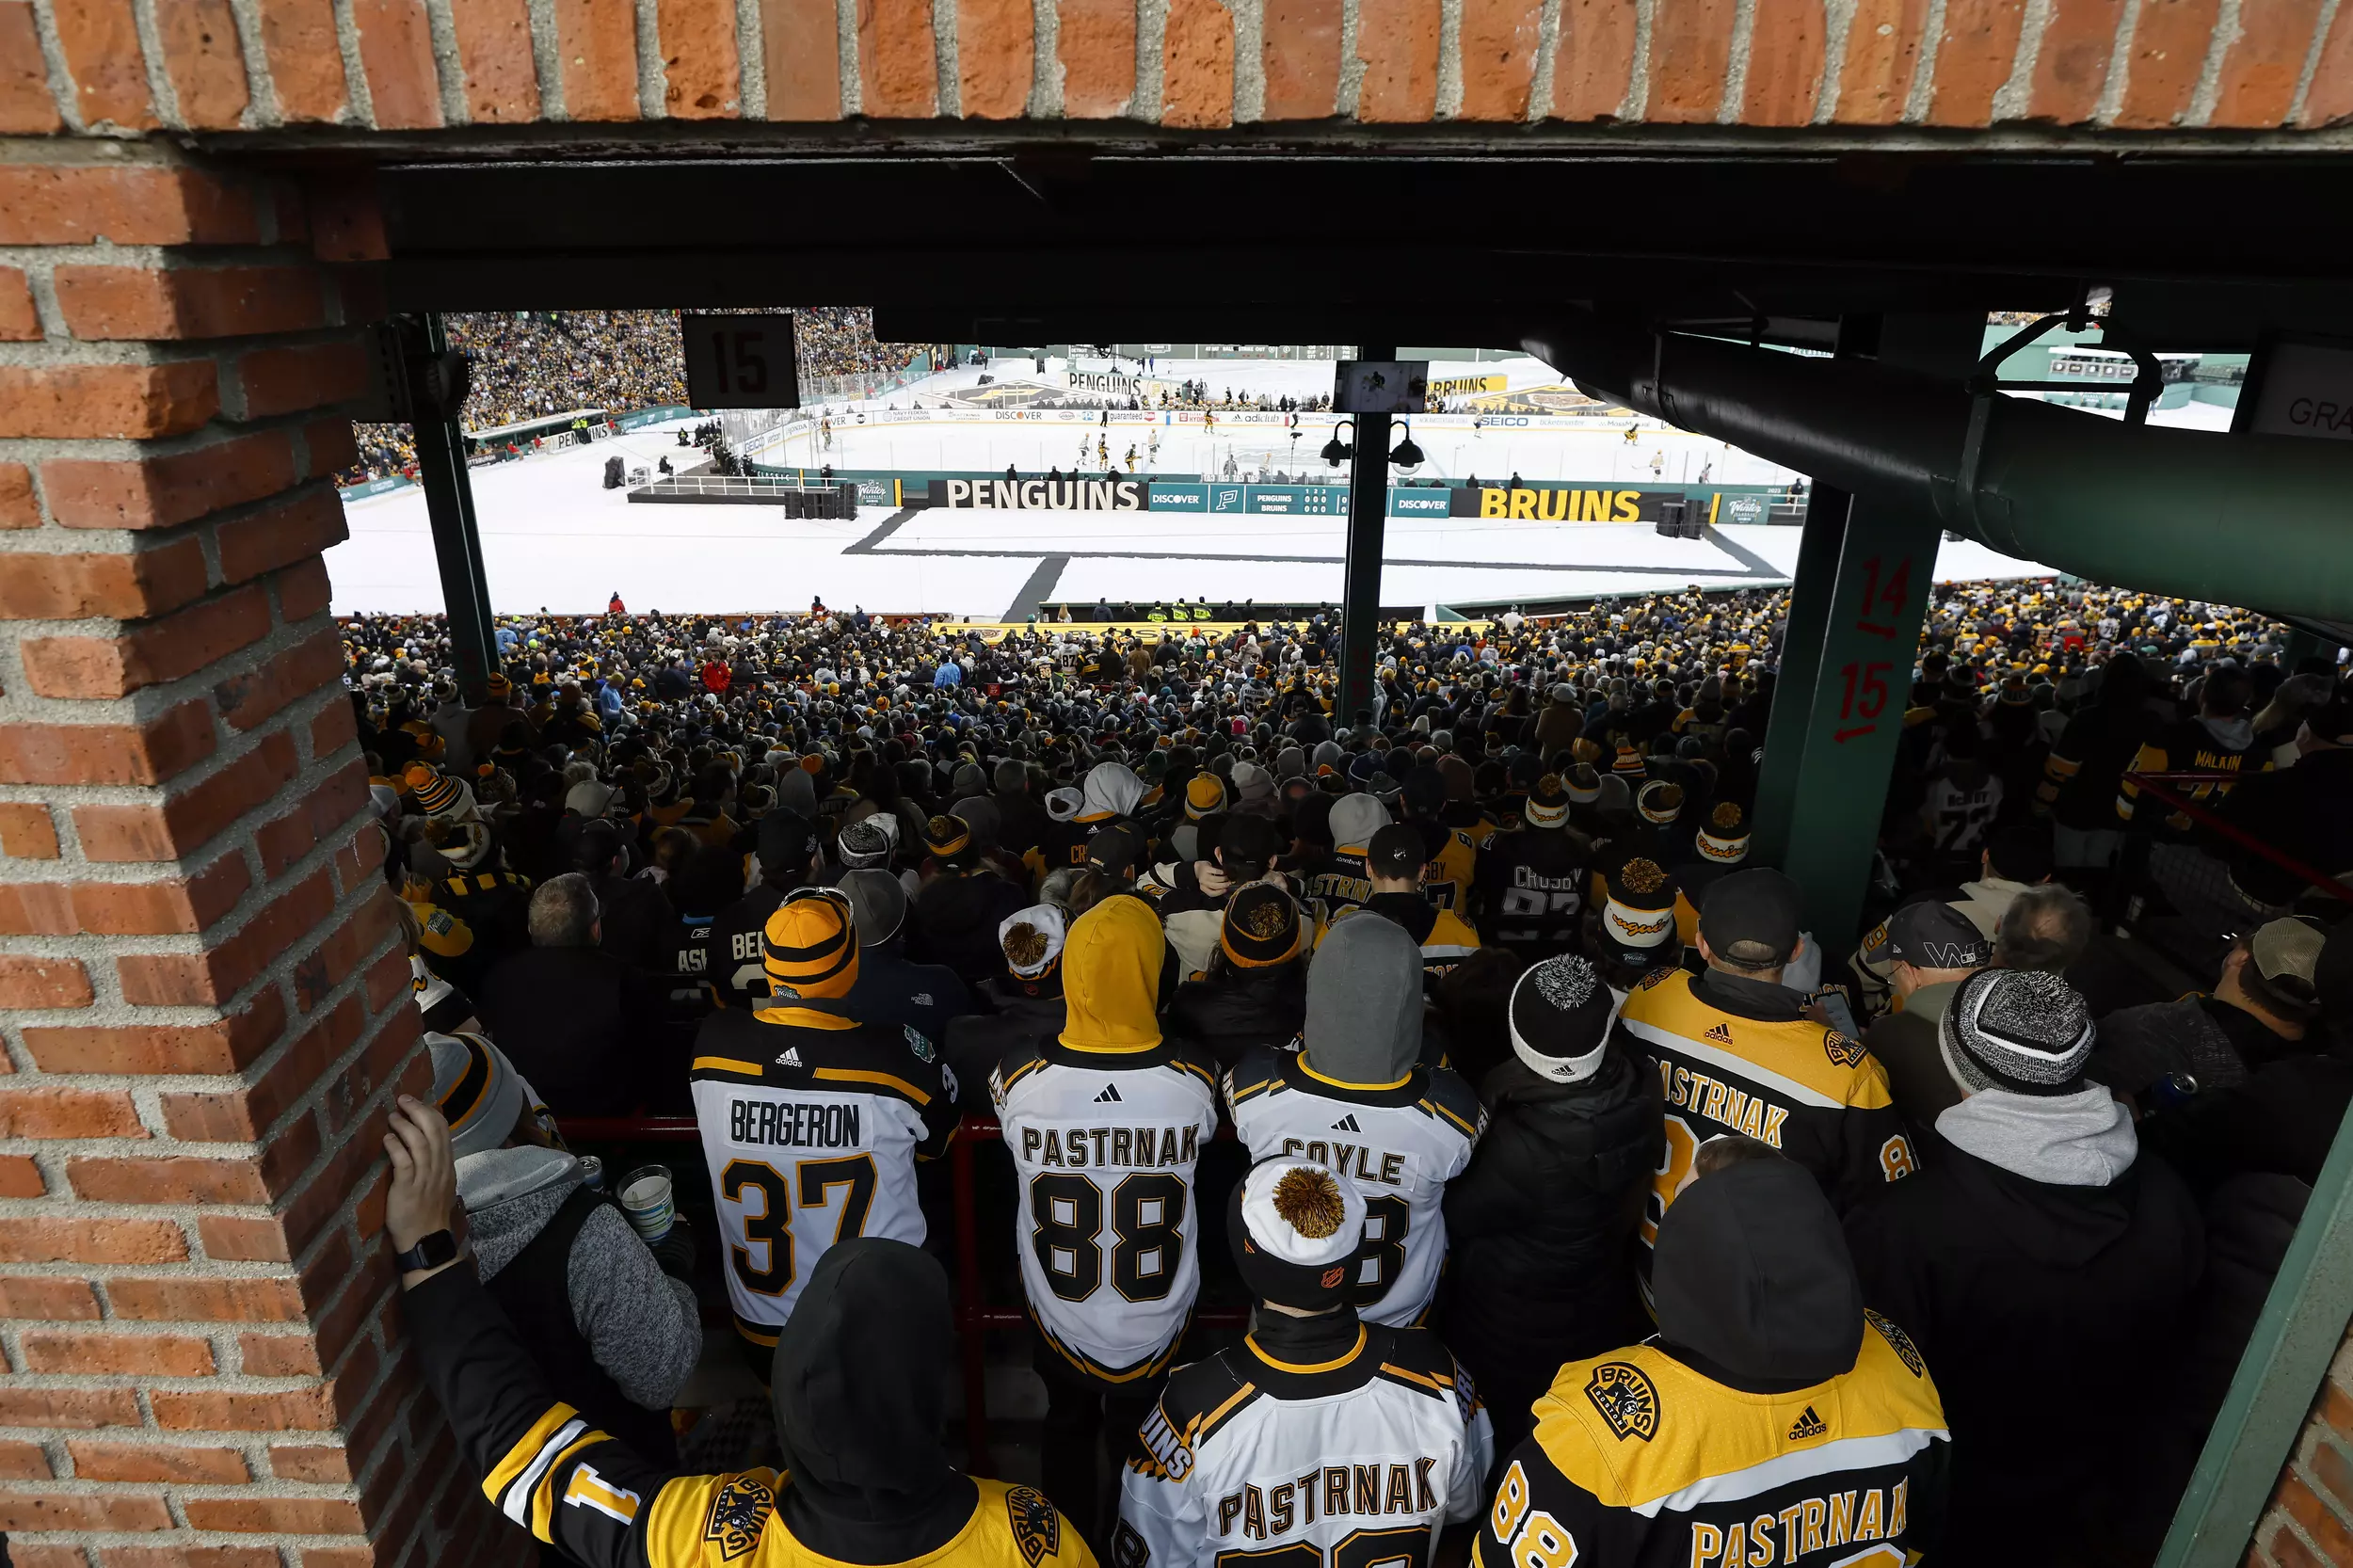 Check out some of the best pictures from the Winter Classic